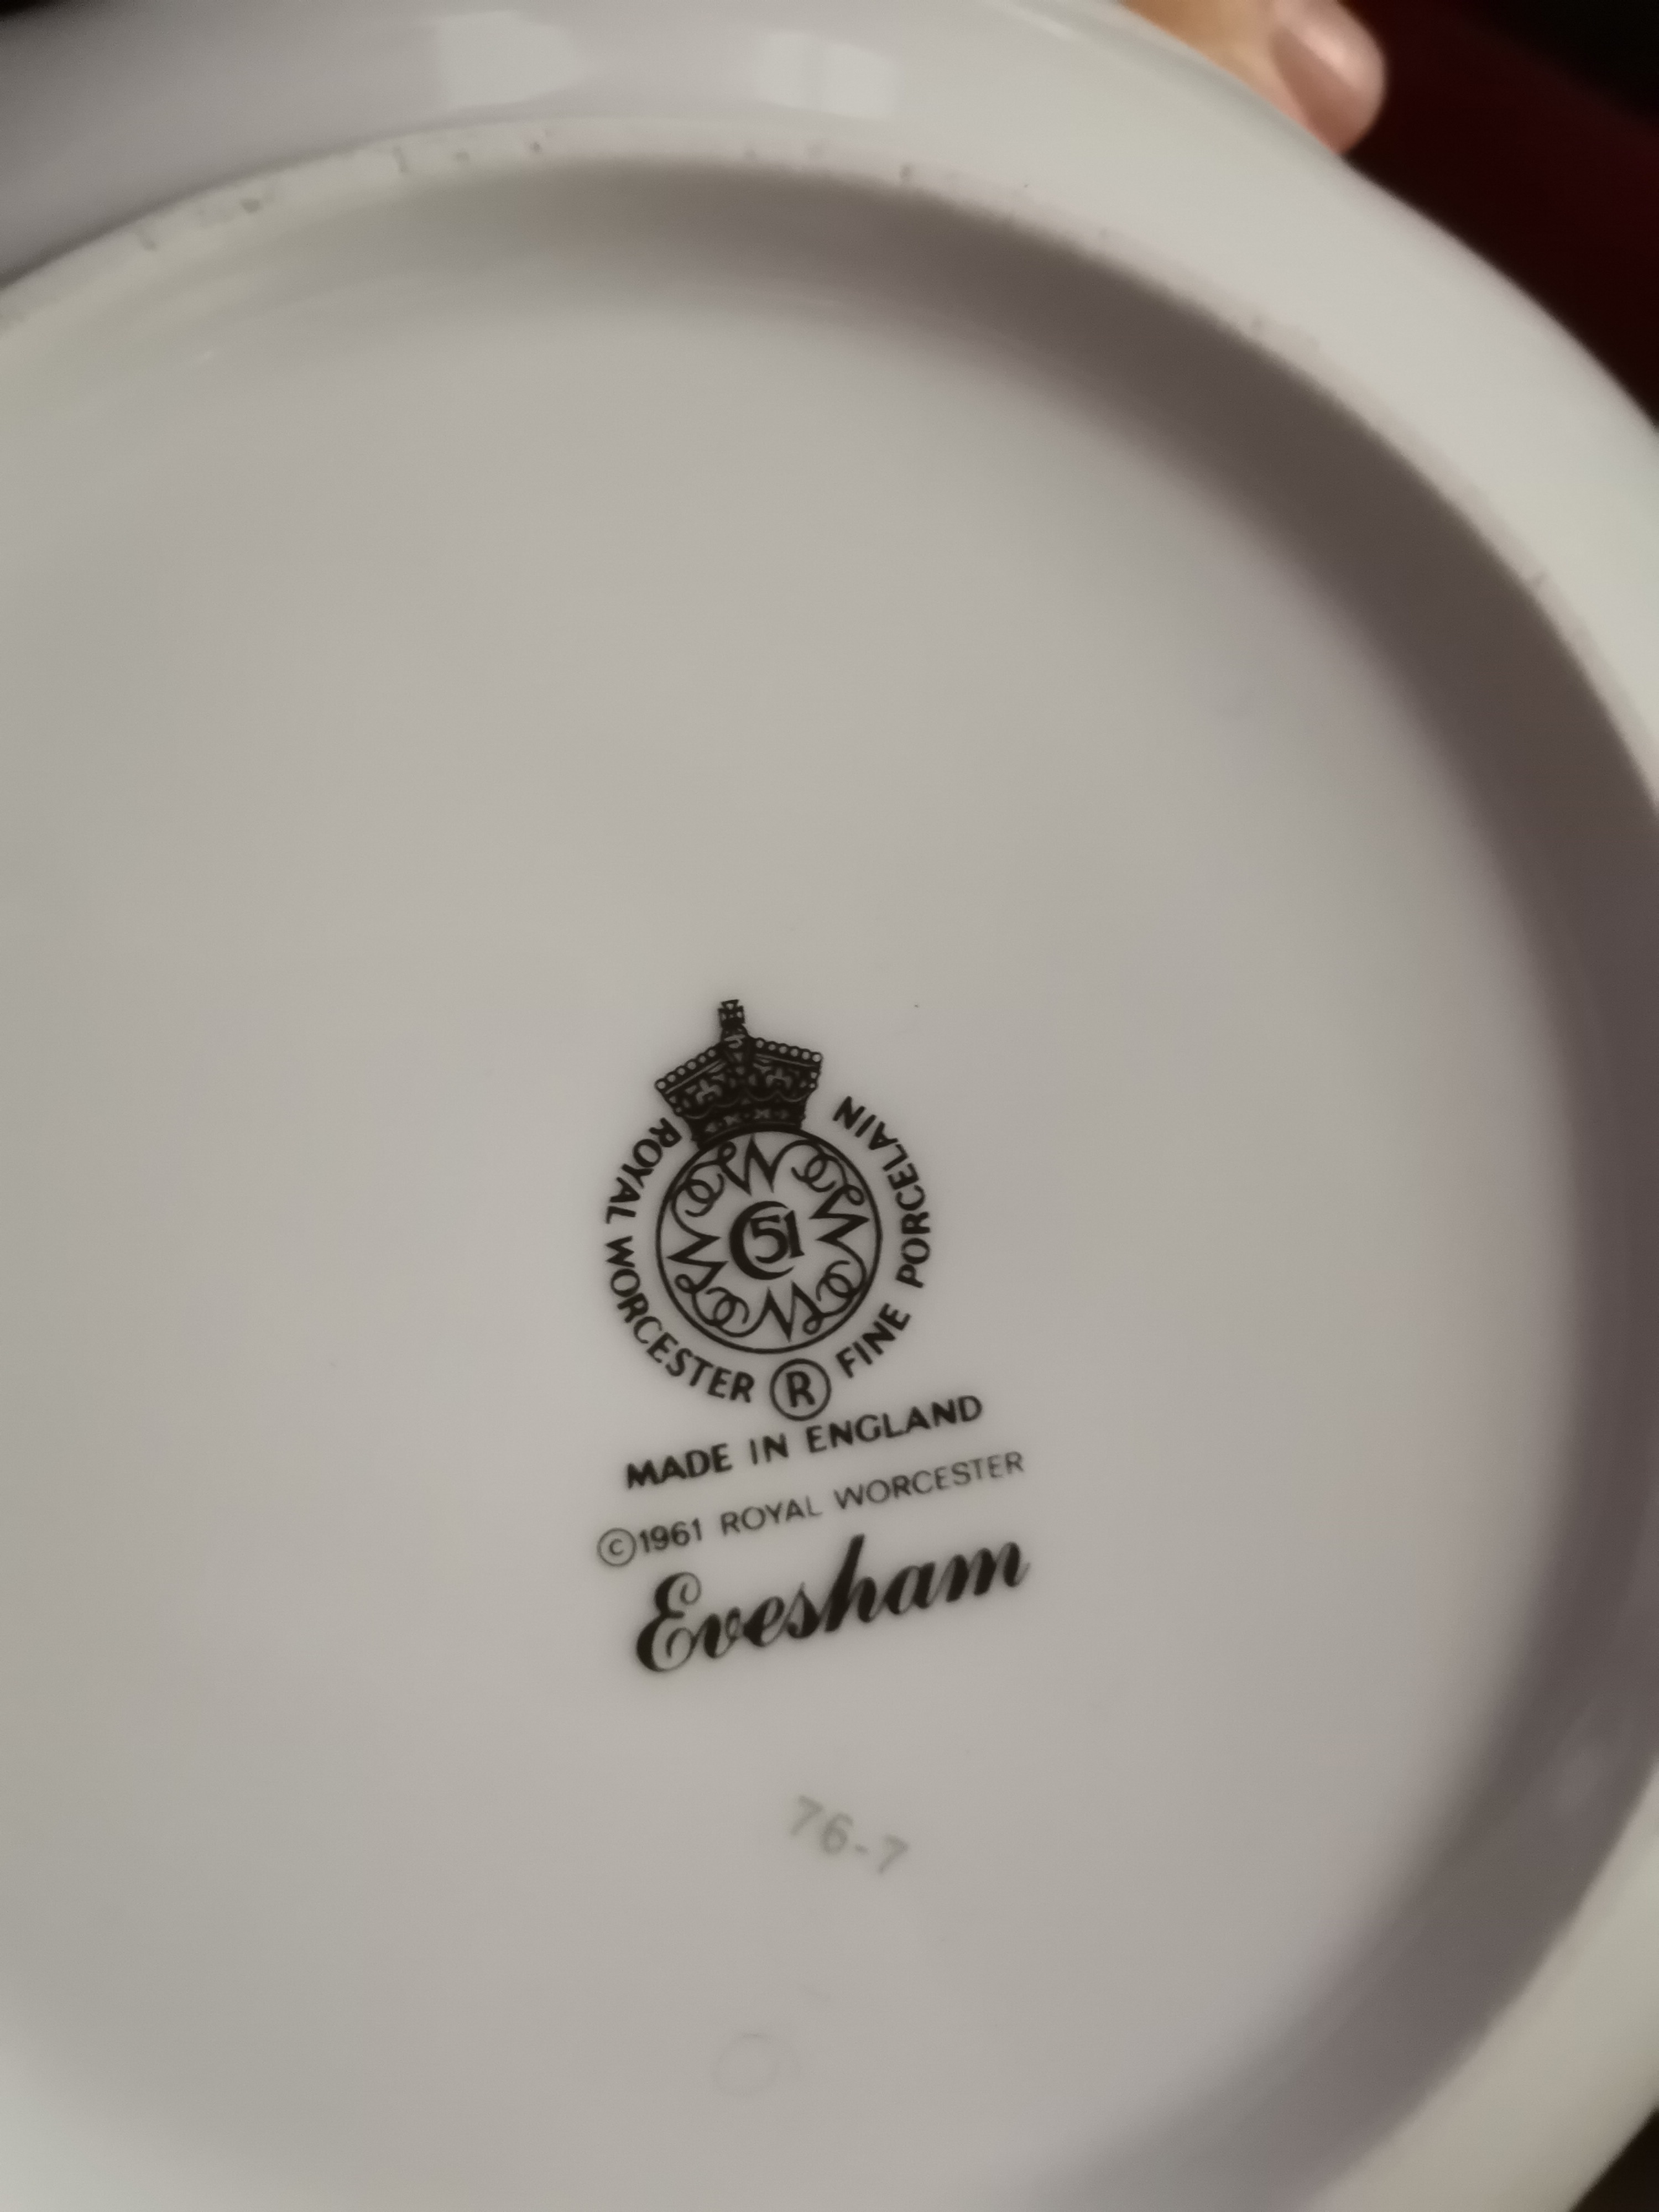 A Box of Royal Worcester "Evesham" Dinnerware - Image 2 of 2